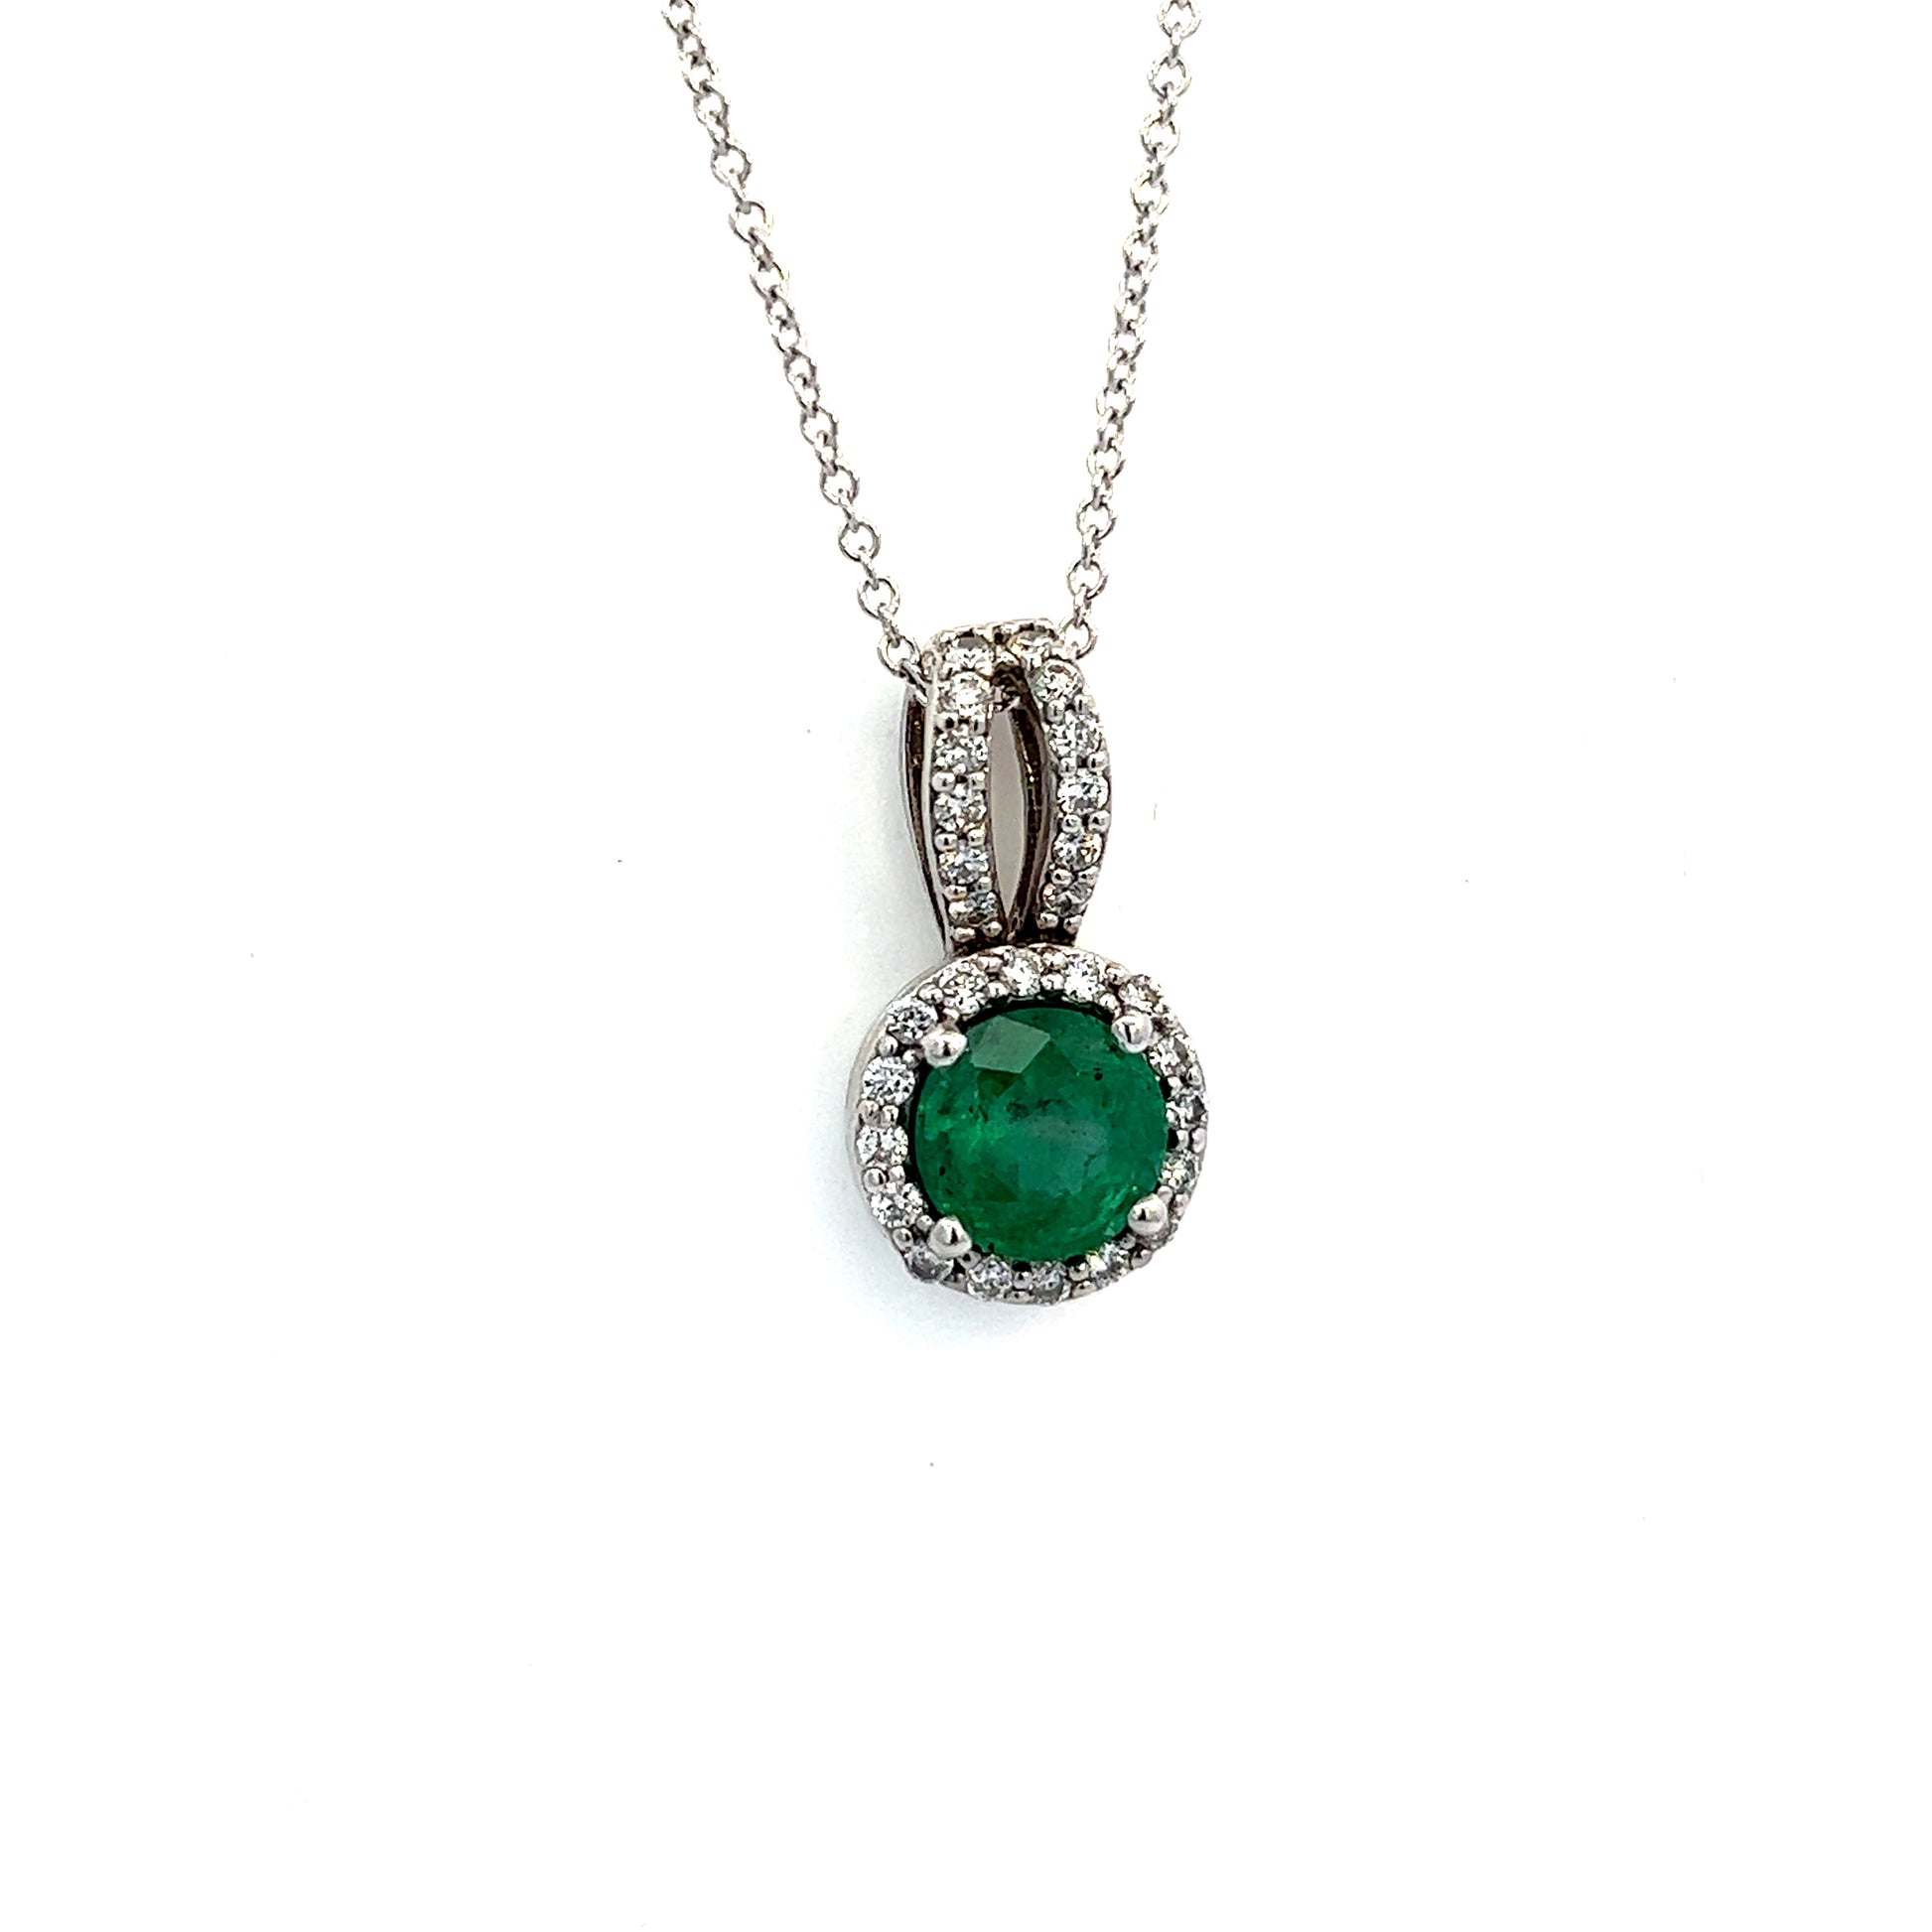 Natural Emerald Diamond Pendant Necklace 18" 14k W Gold 1.84 TCW Certified $5,950 215428